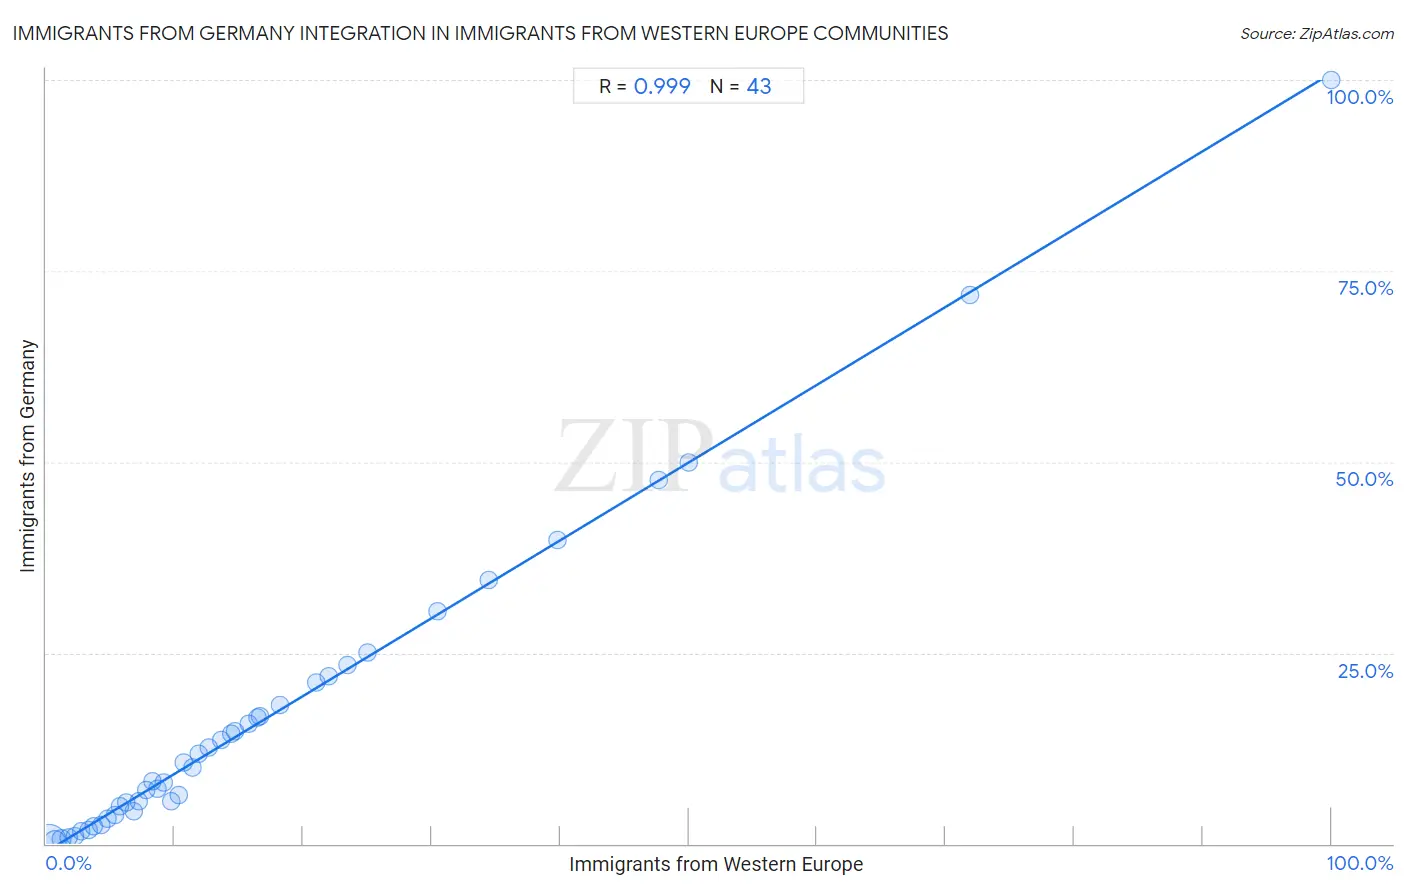 Immigrants from Western Europe Integration in Immigrants from Germany Communities